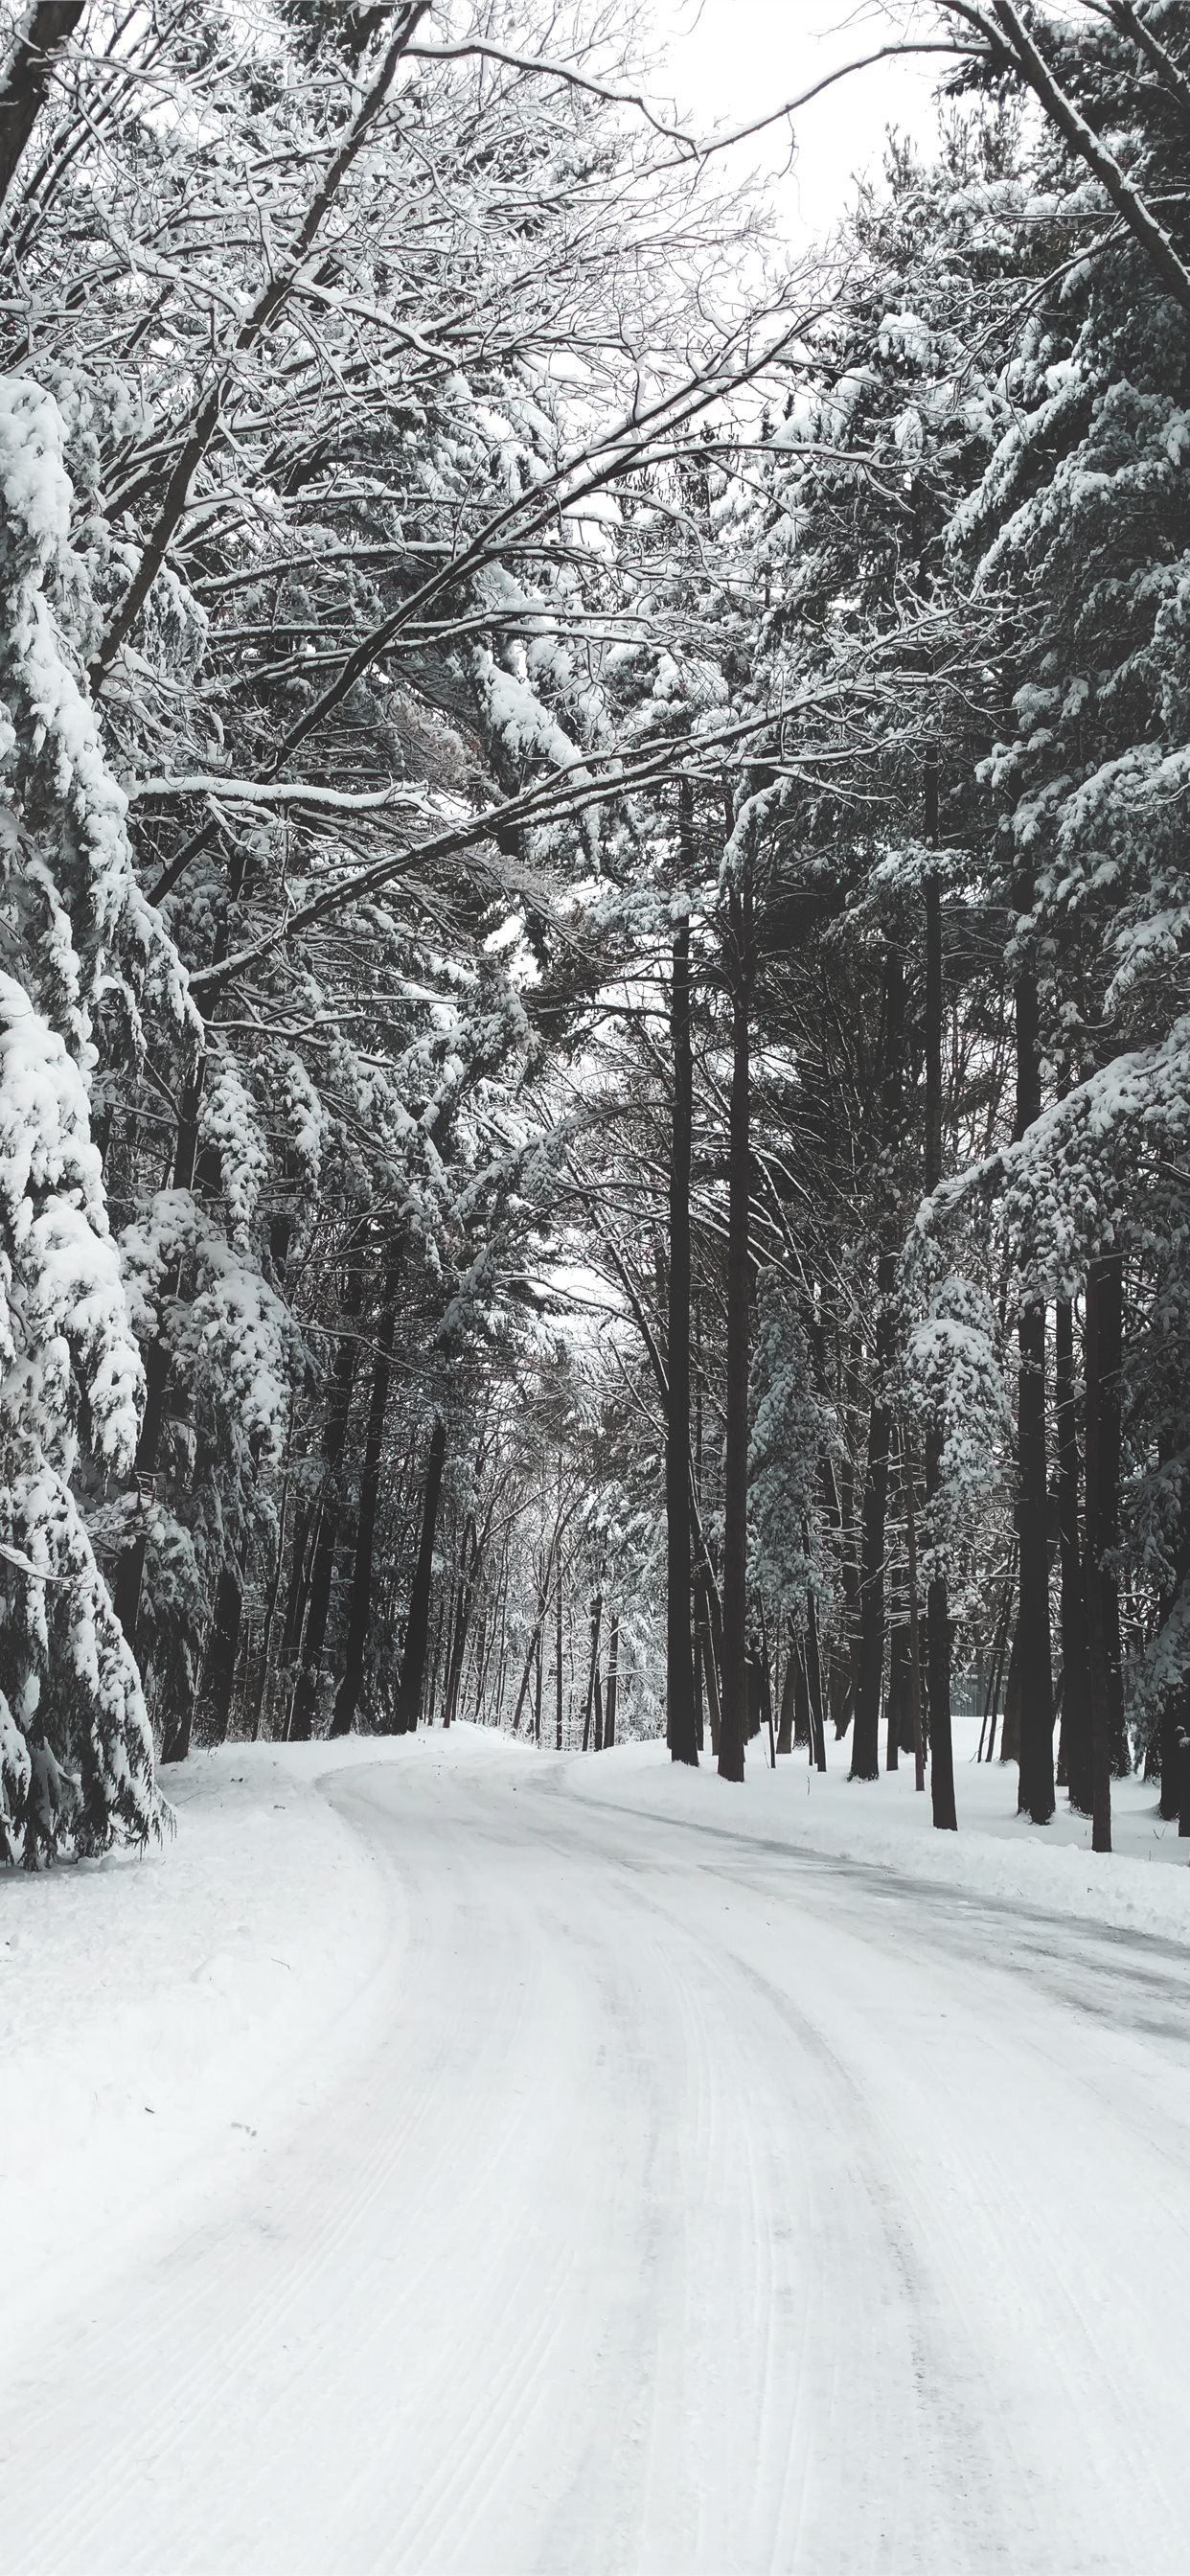 road surrounded by trees during winter iPhone SE Wallpaper Free Download